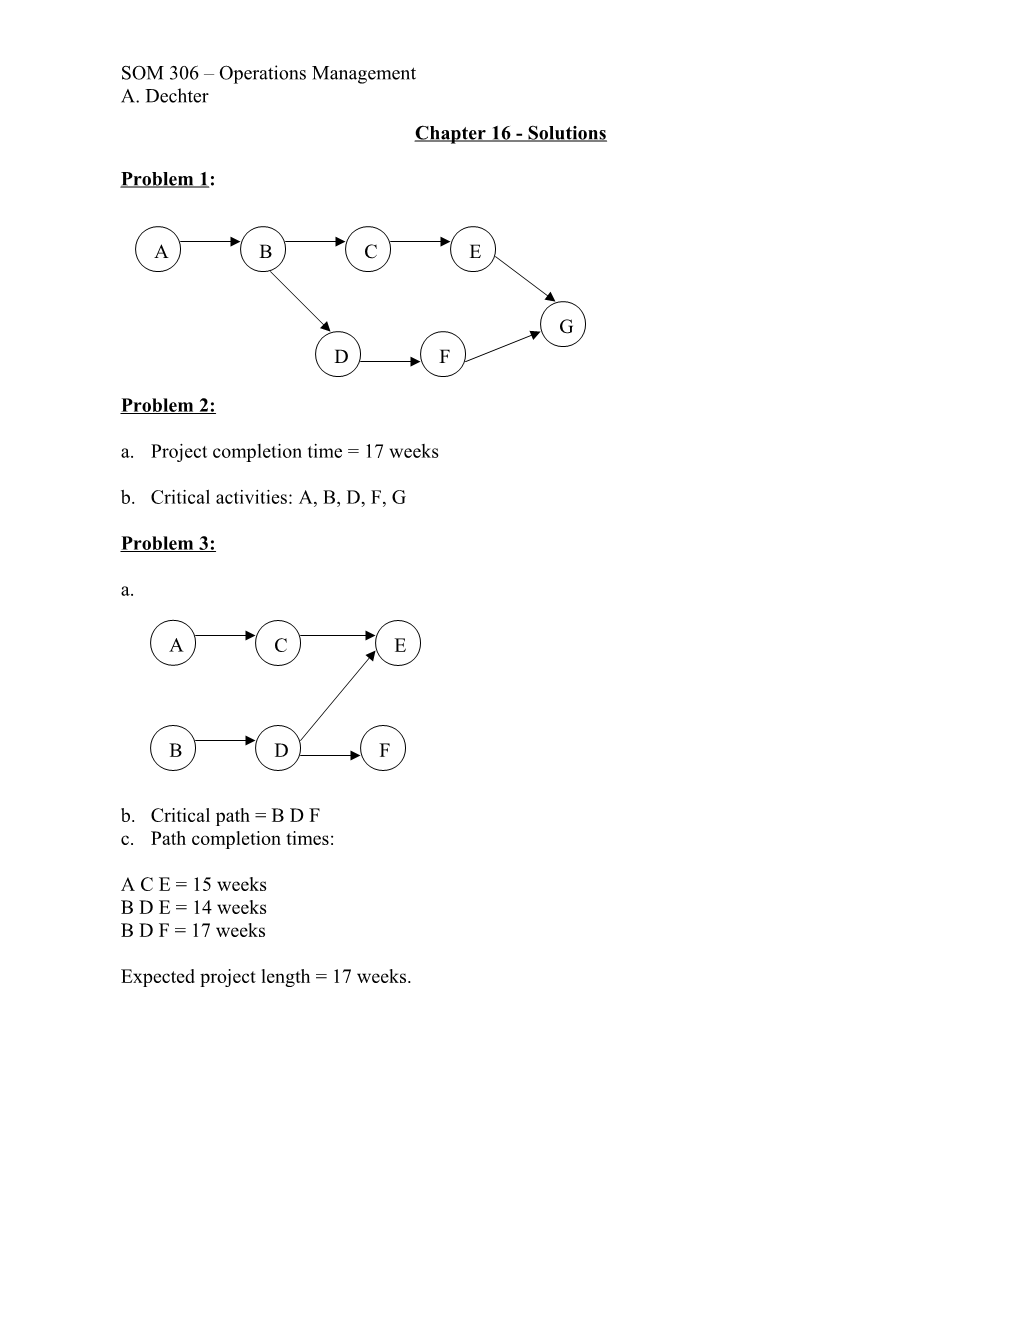 Chapter 16 - Solutions